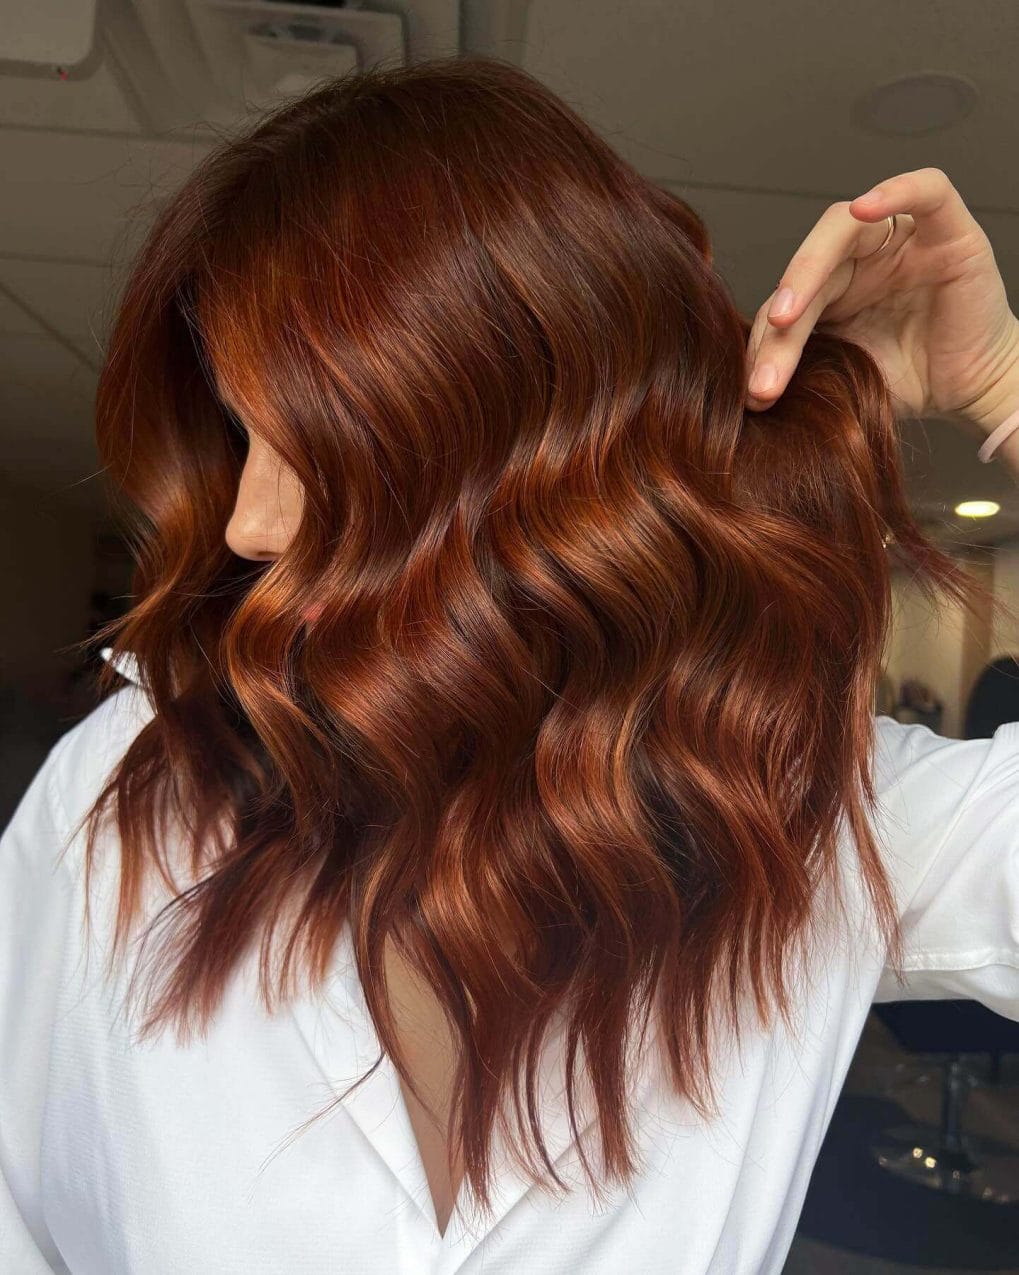 Mid-length copper hair with natural curl and subtly crafted layers.